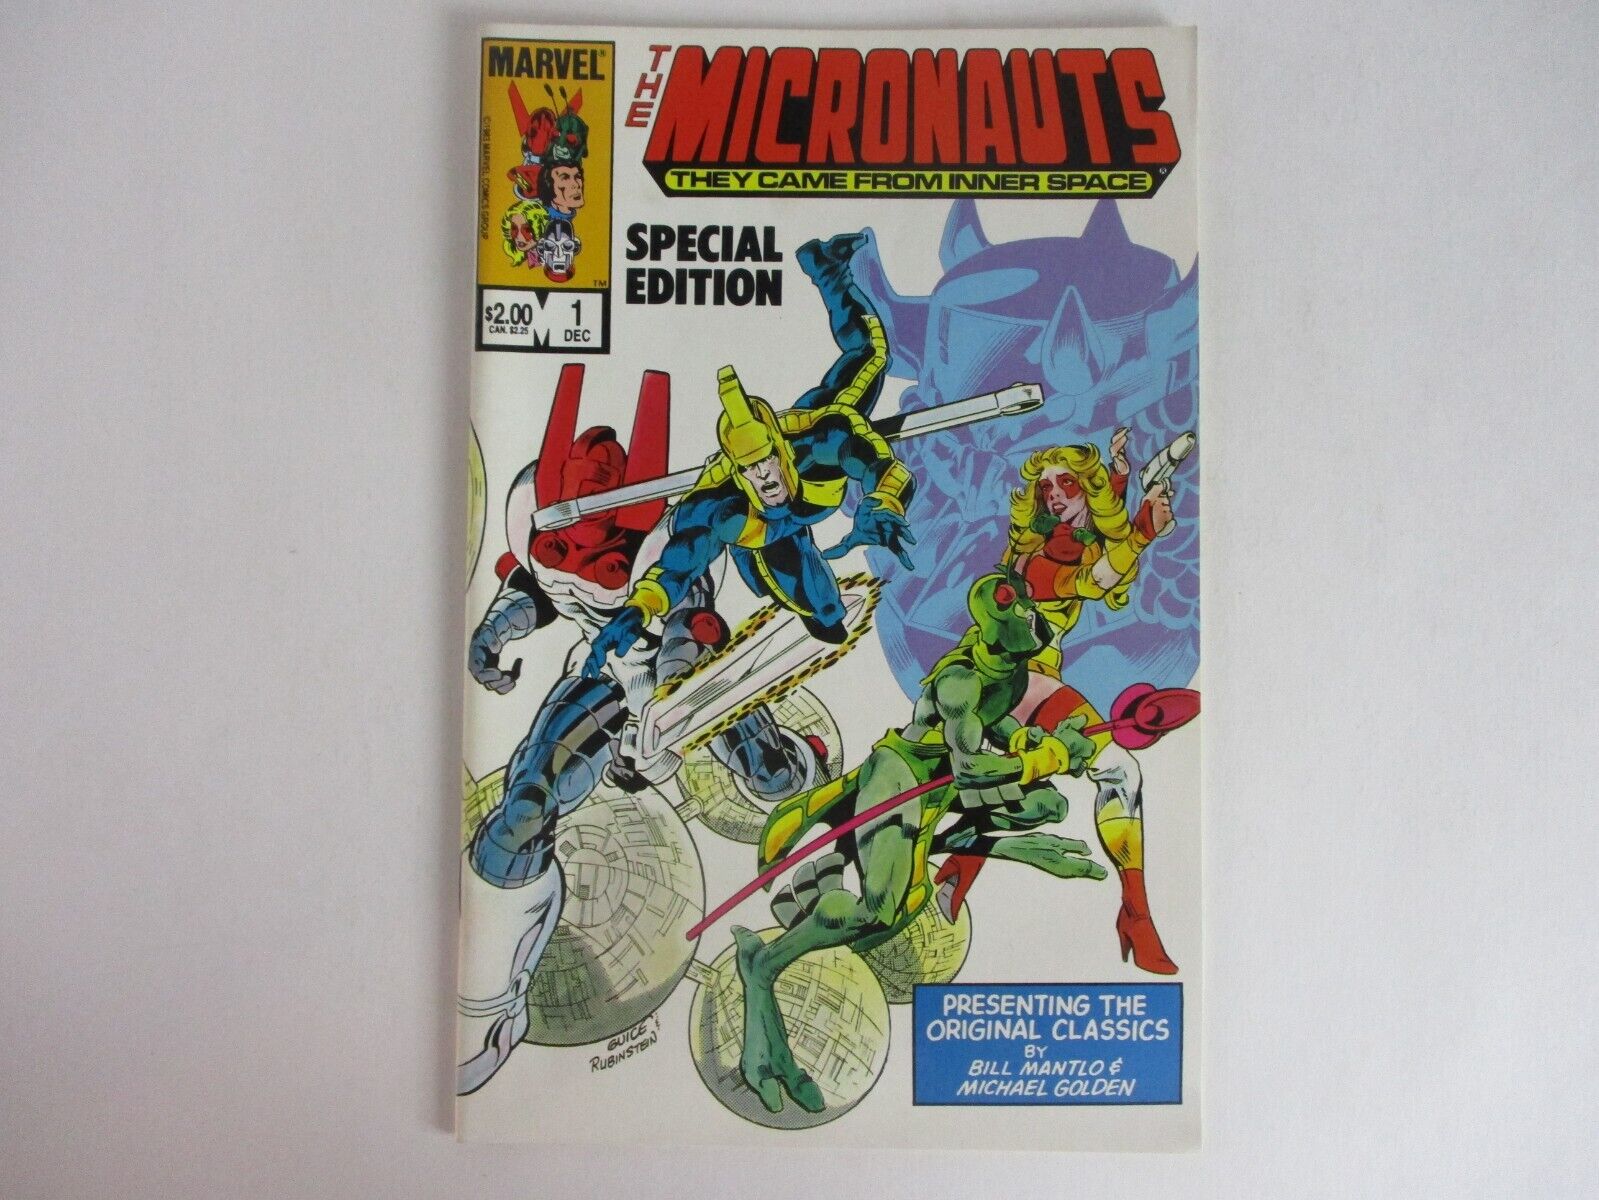 Marvel Comics THE MICRONAUTS Special Edition #1 December 1983 LOOKS GREAT